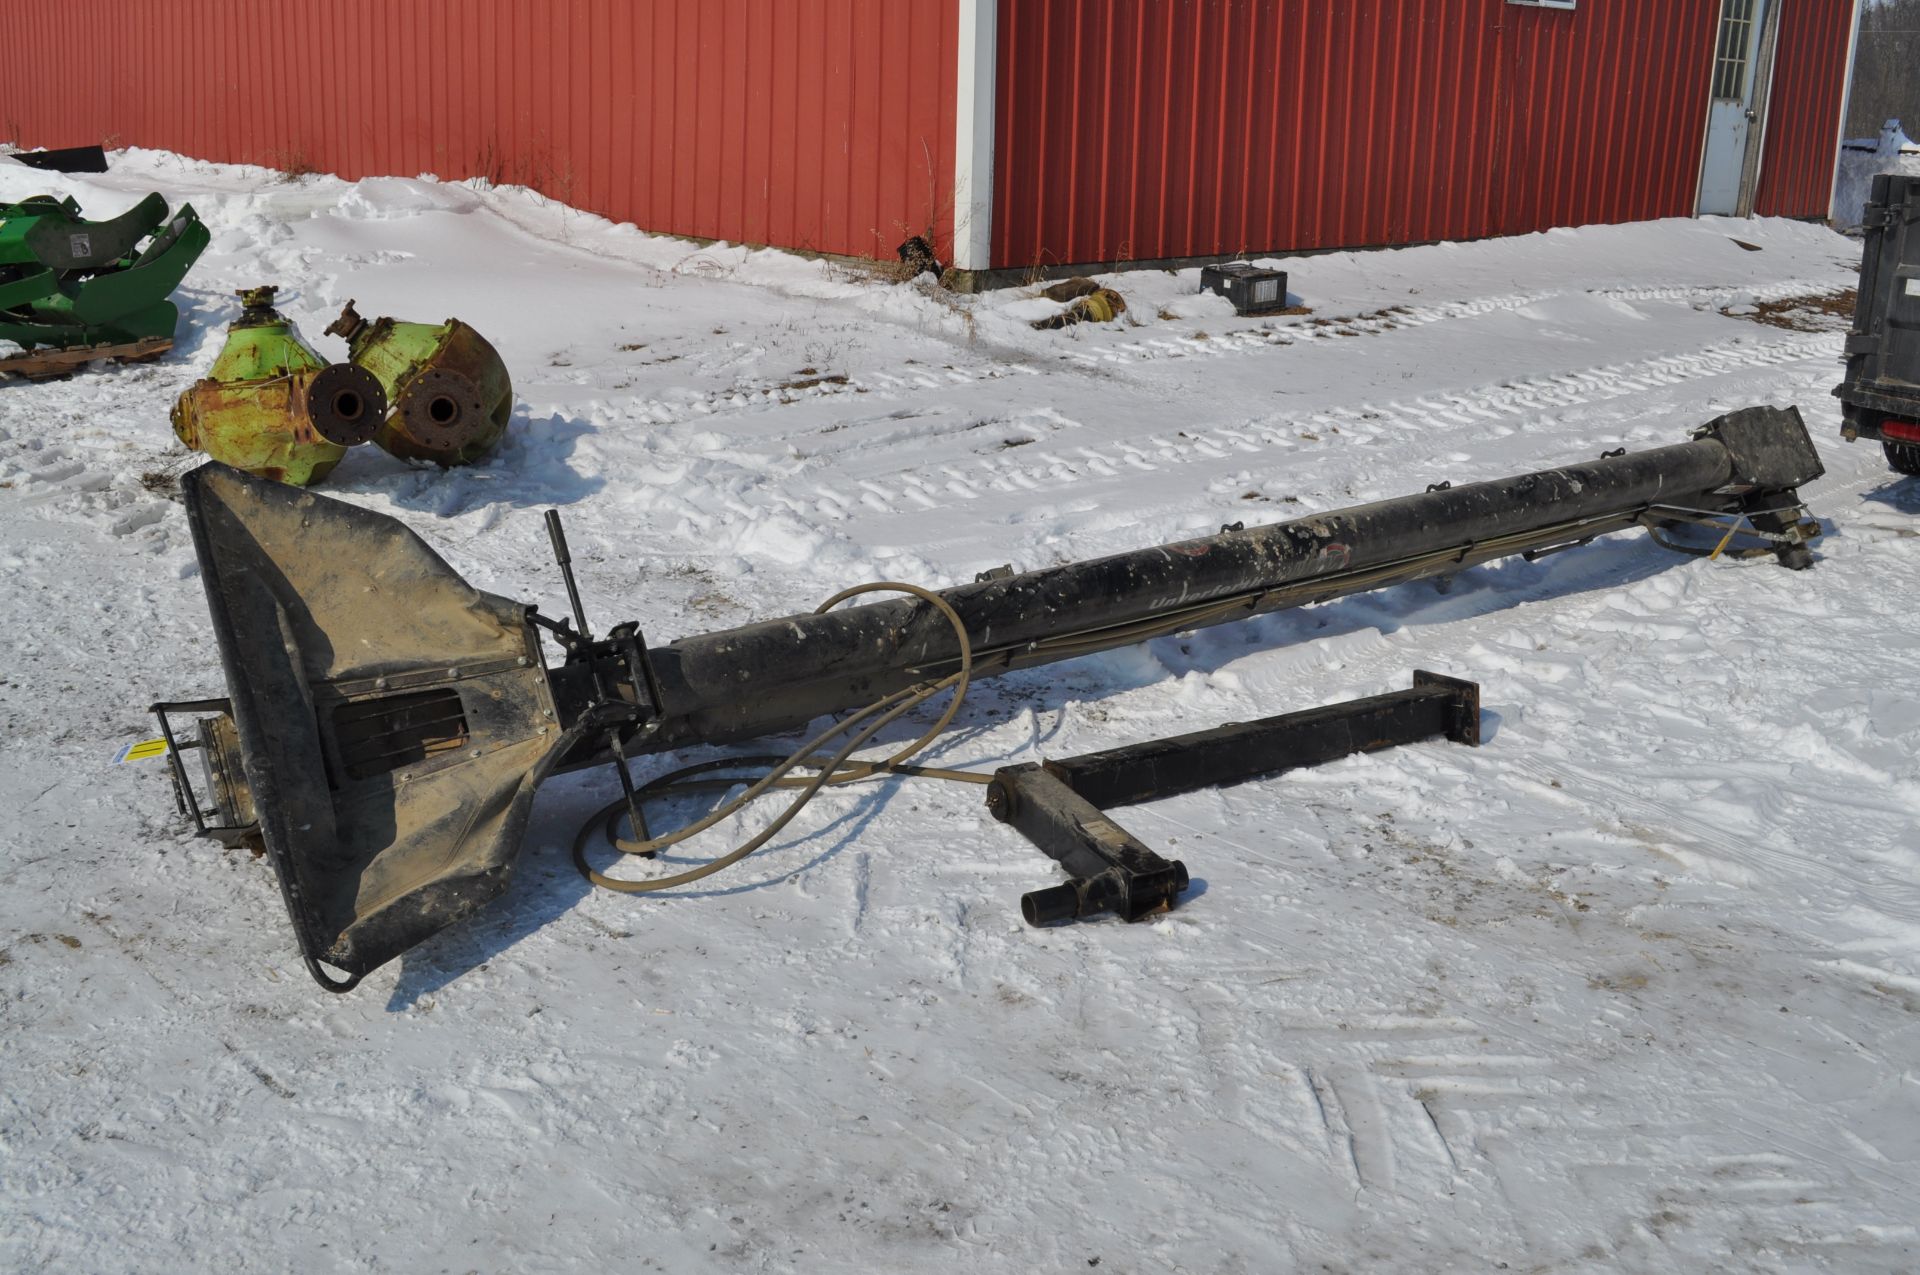 Unverferth cleated belt conveyor, with mount for John Deere 1990 air seeder